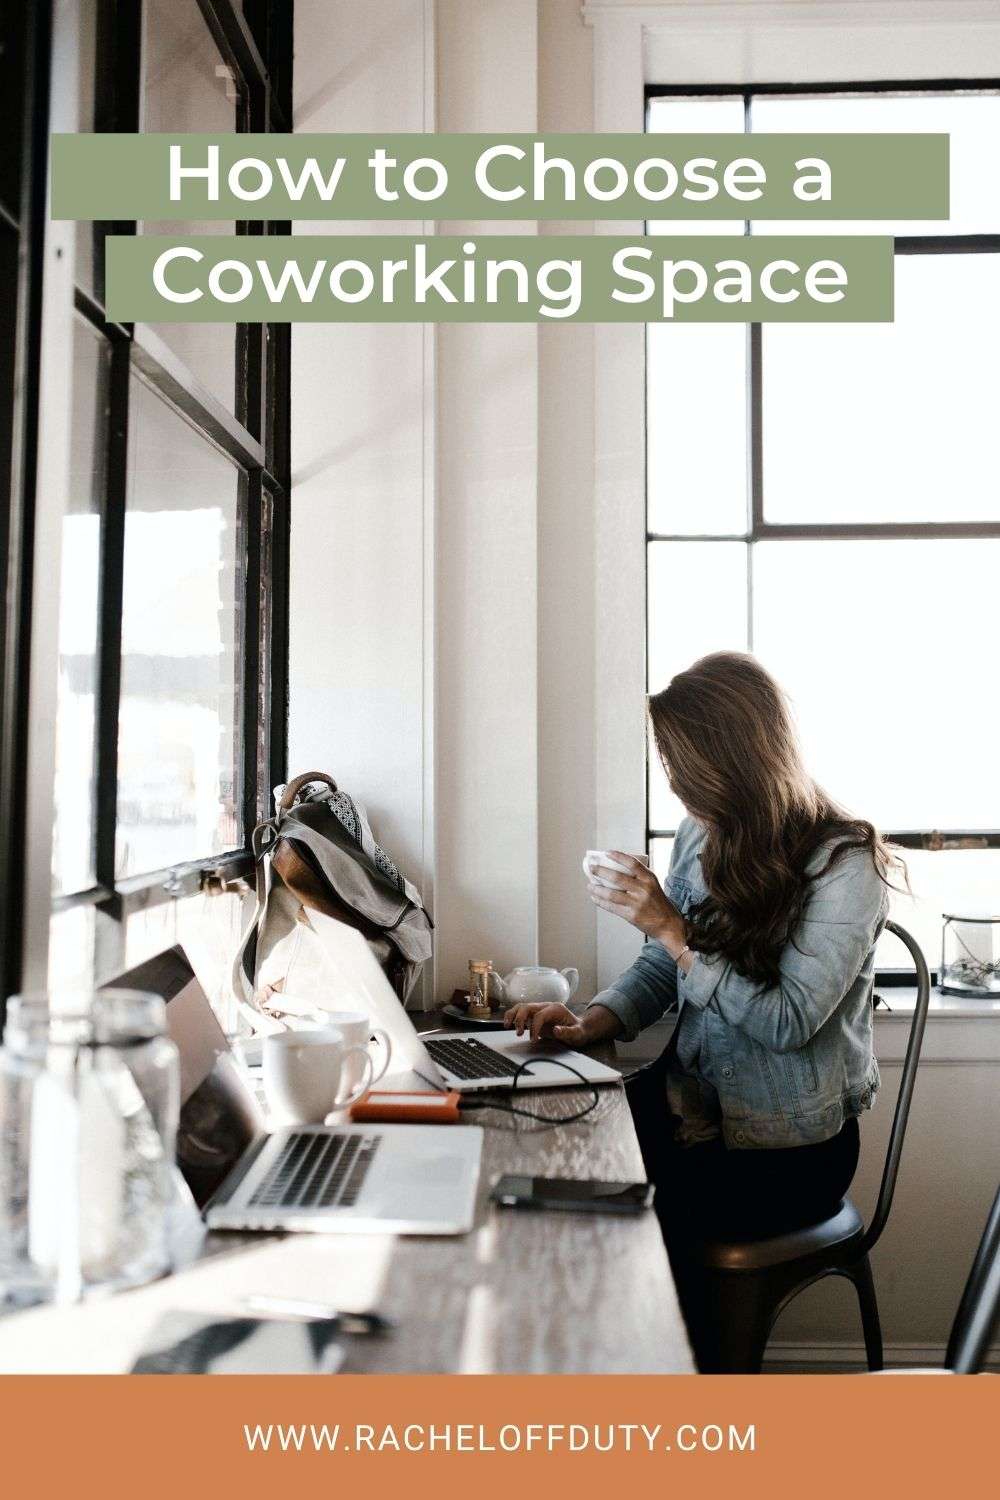 How to Find a Coworking Space - Rachel Off Duty